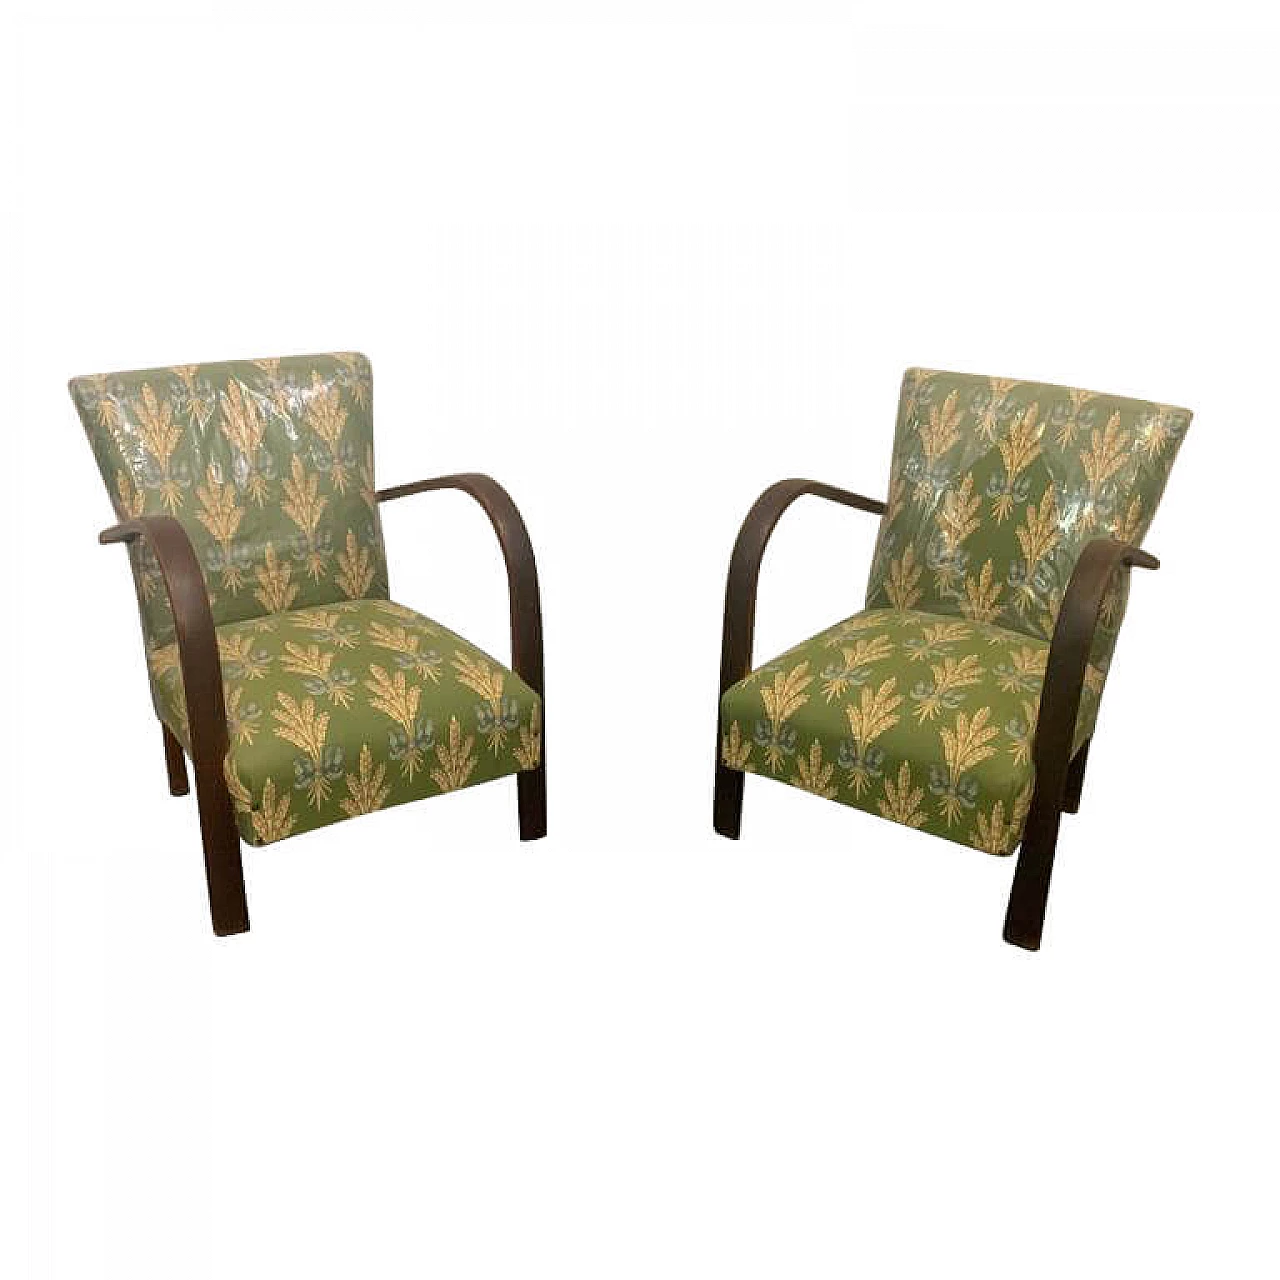 Pair of armchairs with brocade fabric, 1930s 1182047